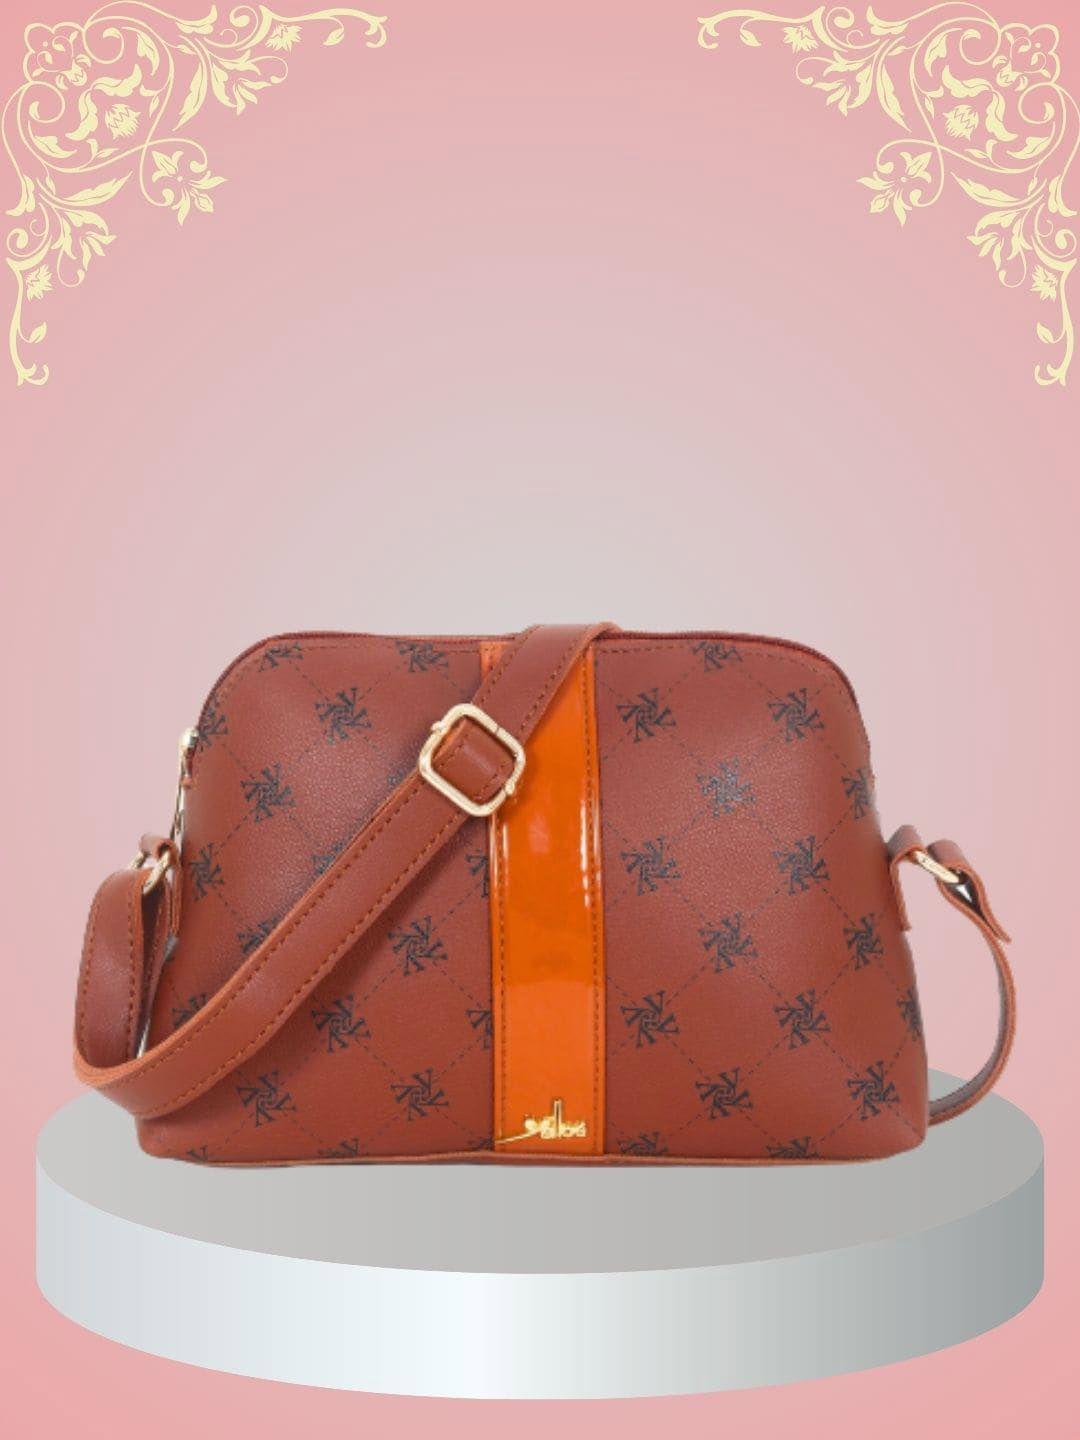 yelloe tan floral printed structured sling bag with bow detail